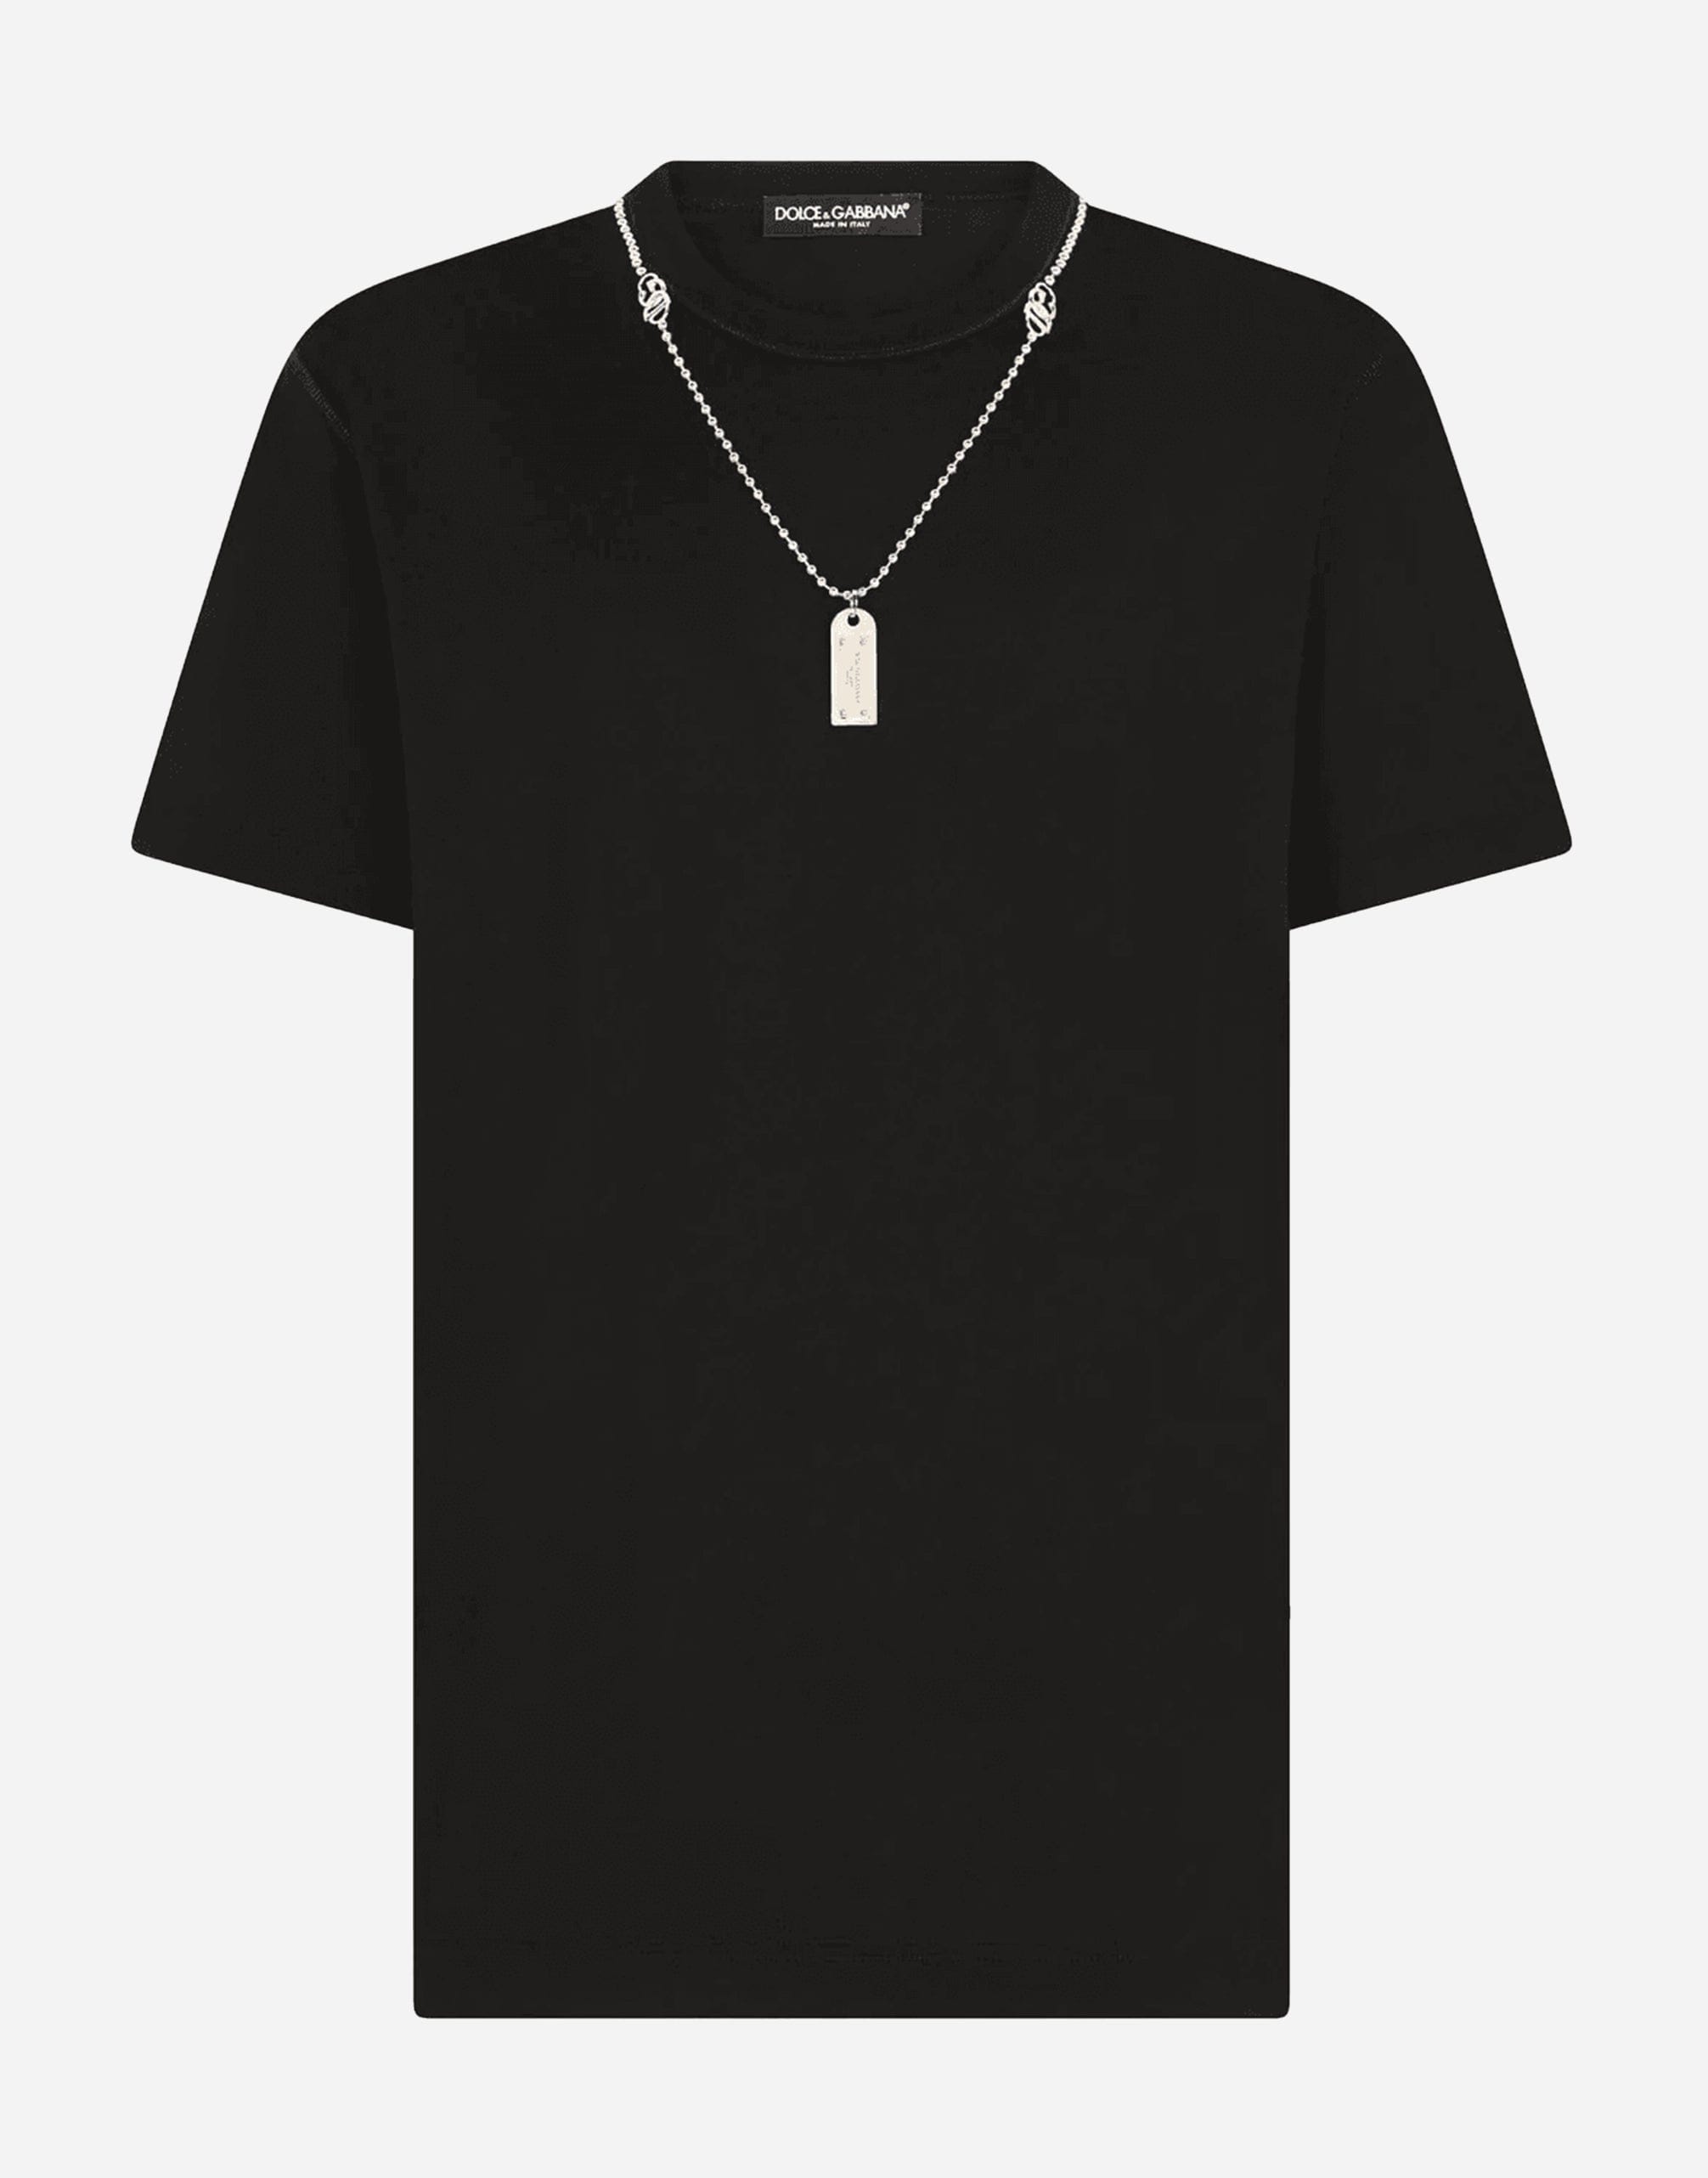 Dolce & Gabbana Cotton T-Shirt With Necklace